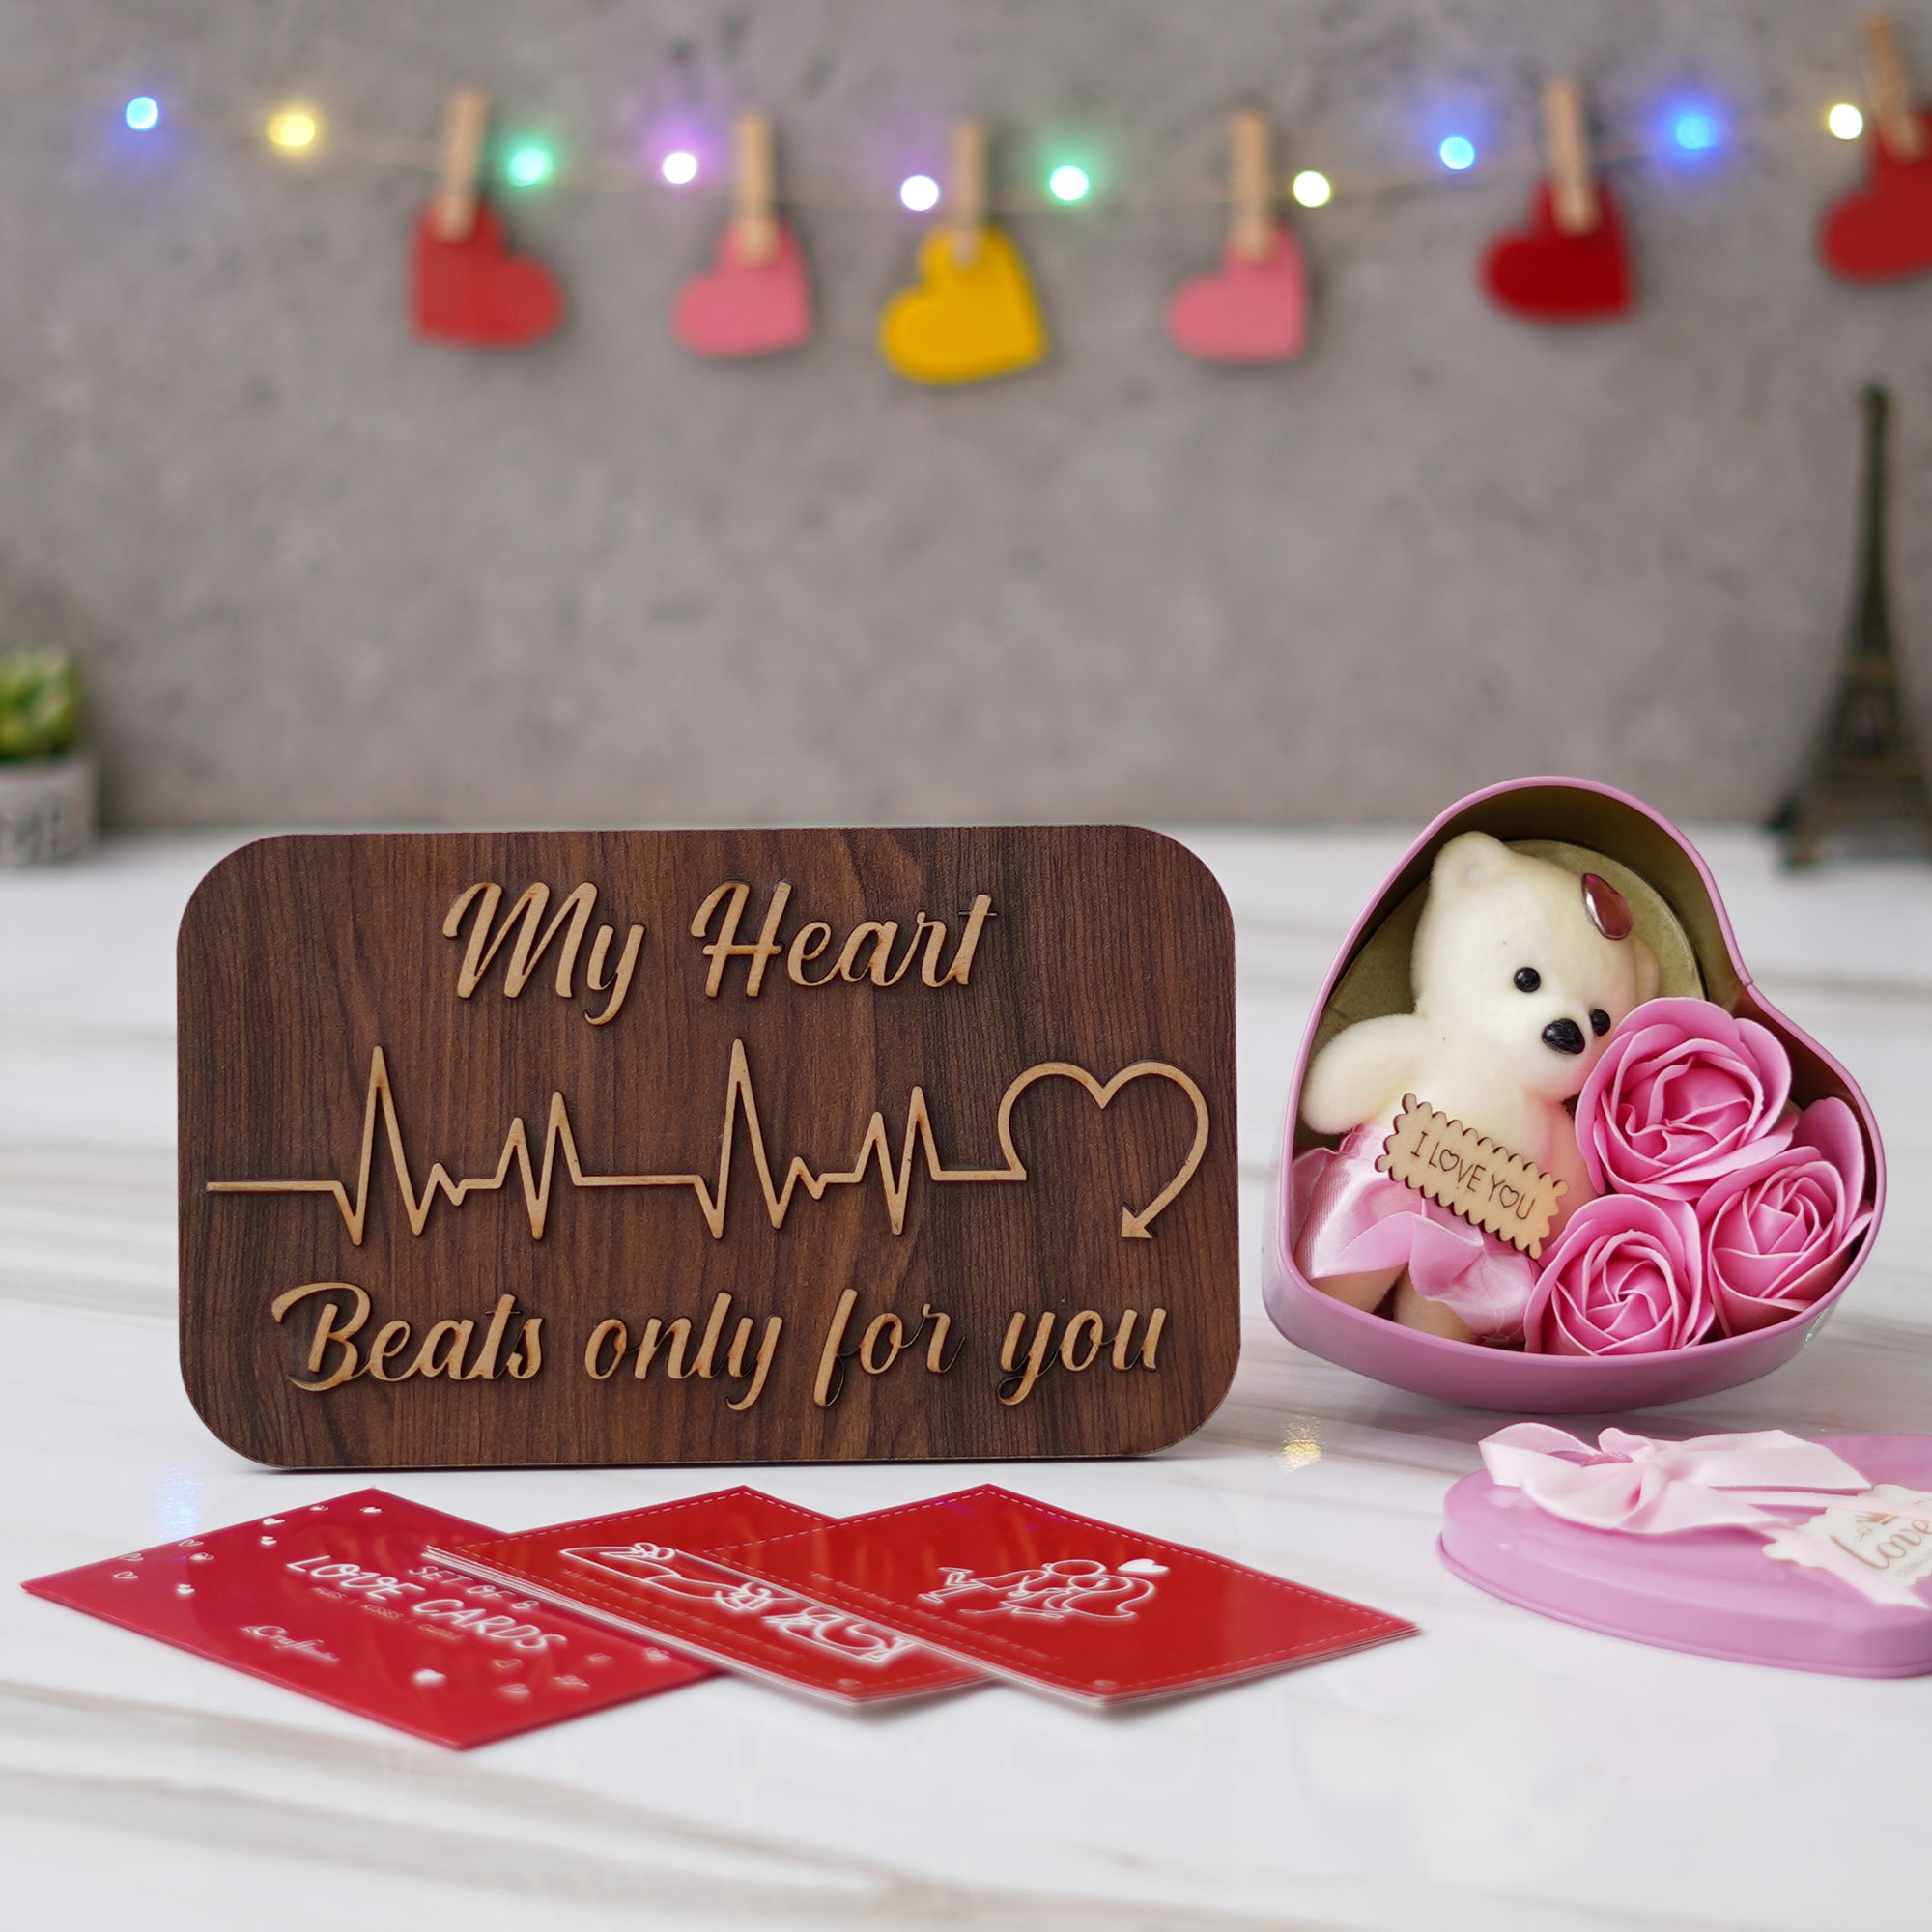 Valentine Combo of Pack of 8 Love Gift Cards, "My Heart Beats Only For You" Wooden Showpiece With Stand, Pink Heart Shaped Gift Box with Teddy and Roses